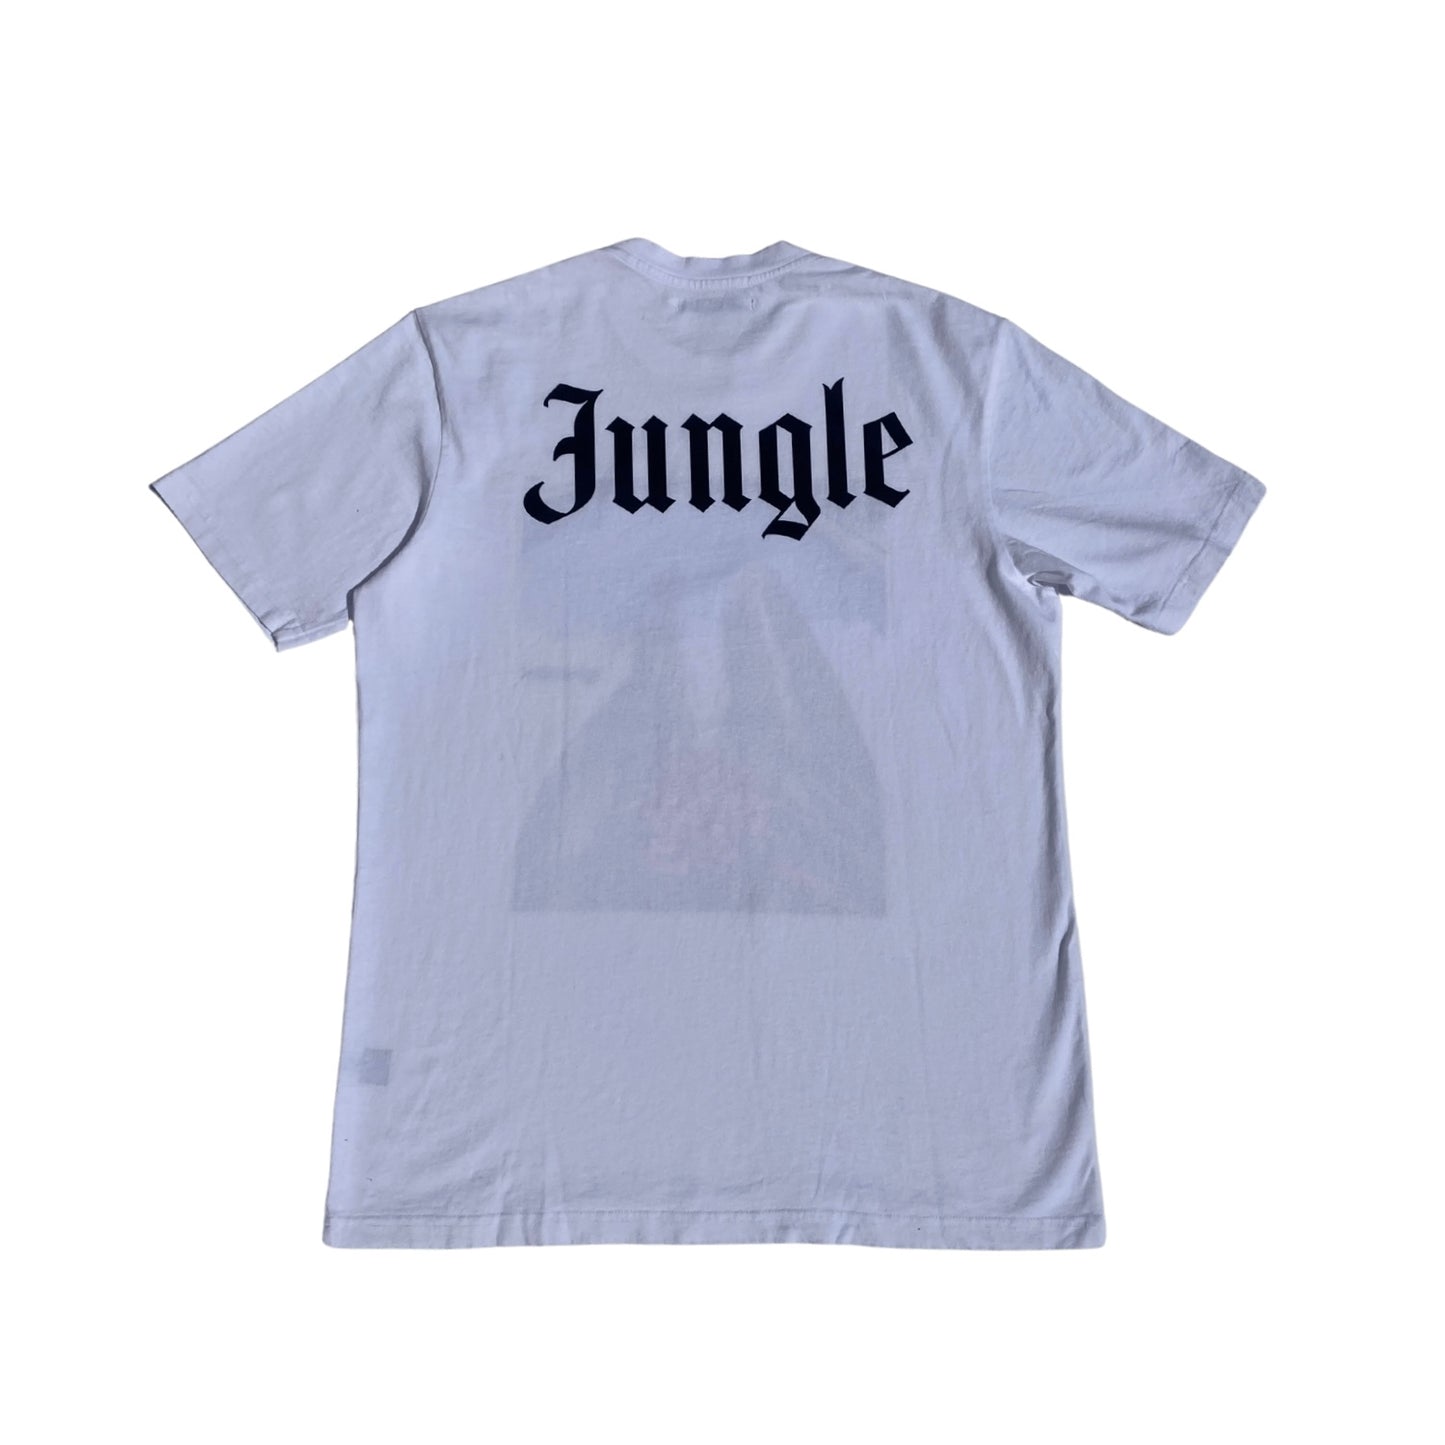 “ALWAYS ON VACATION” JUNGLE T-Shirt